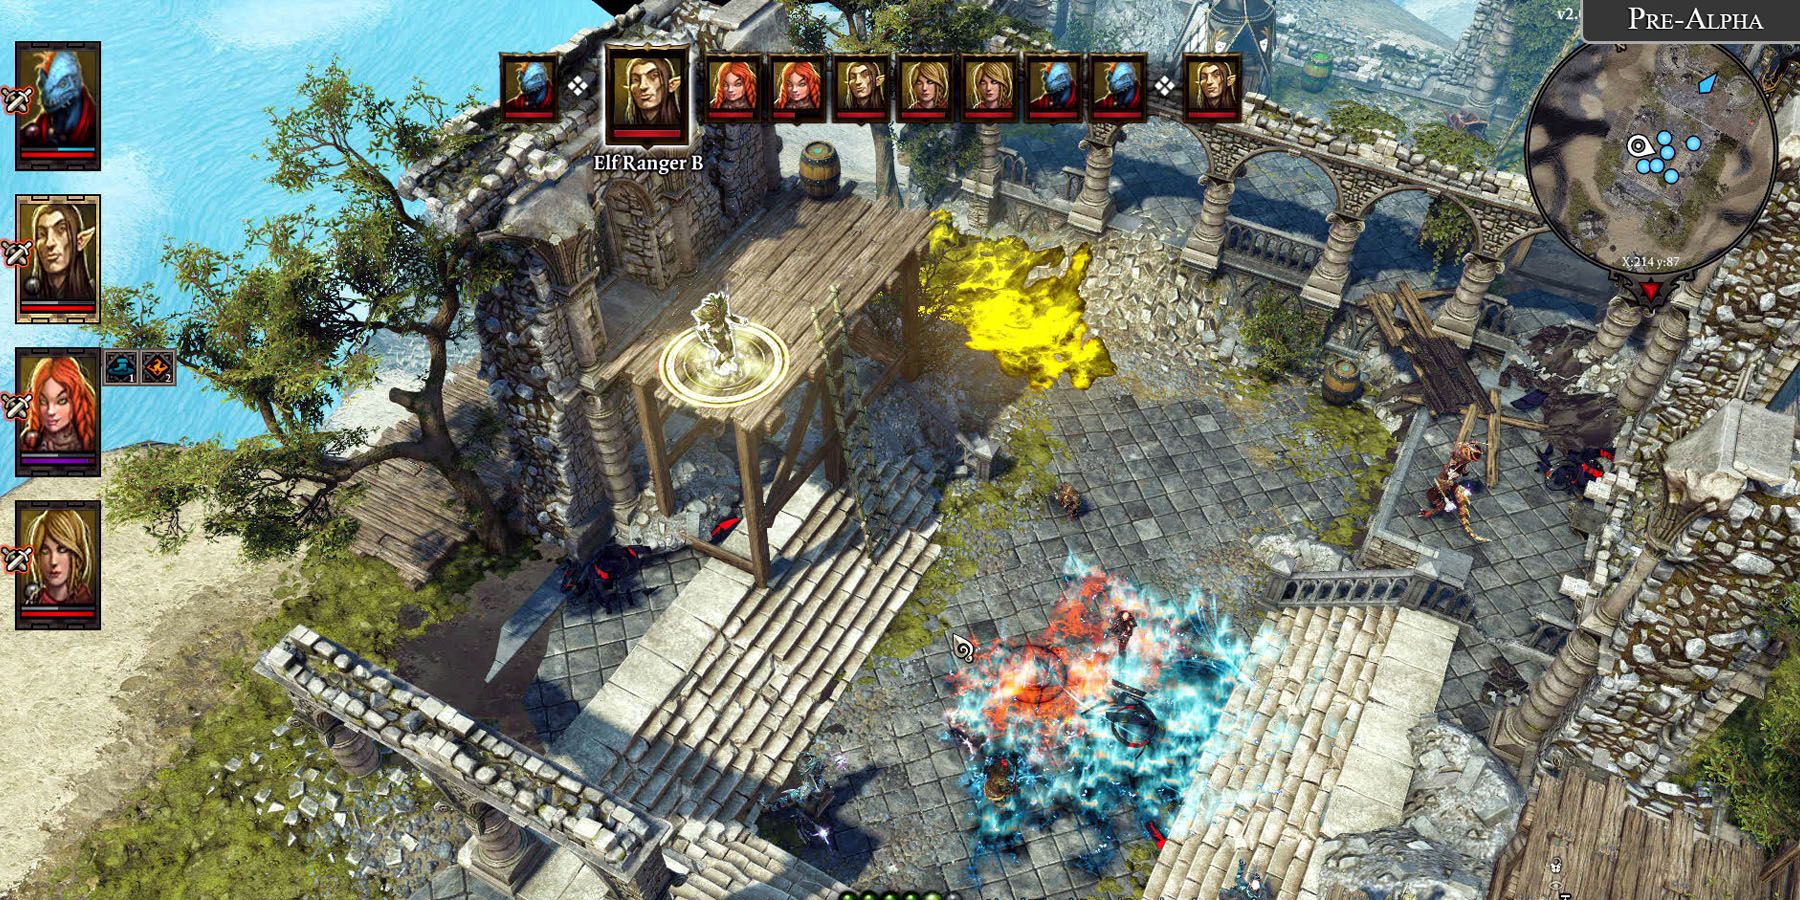 Fighting opponents in different sections of the map in DOS2